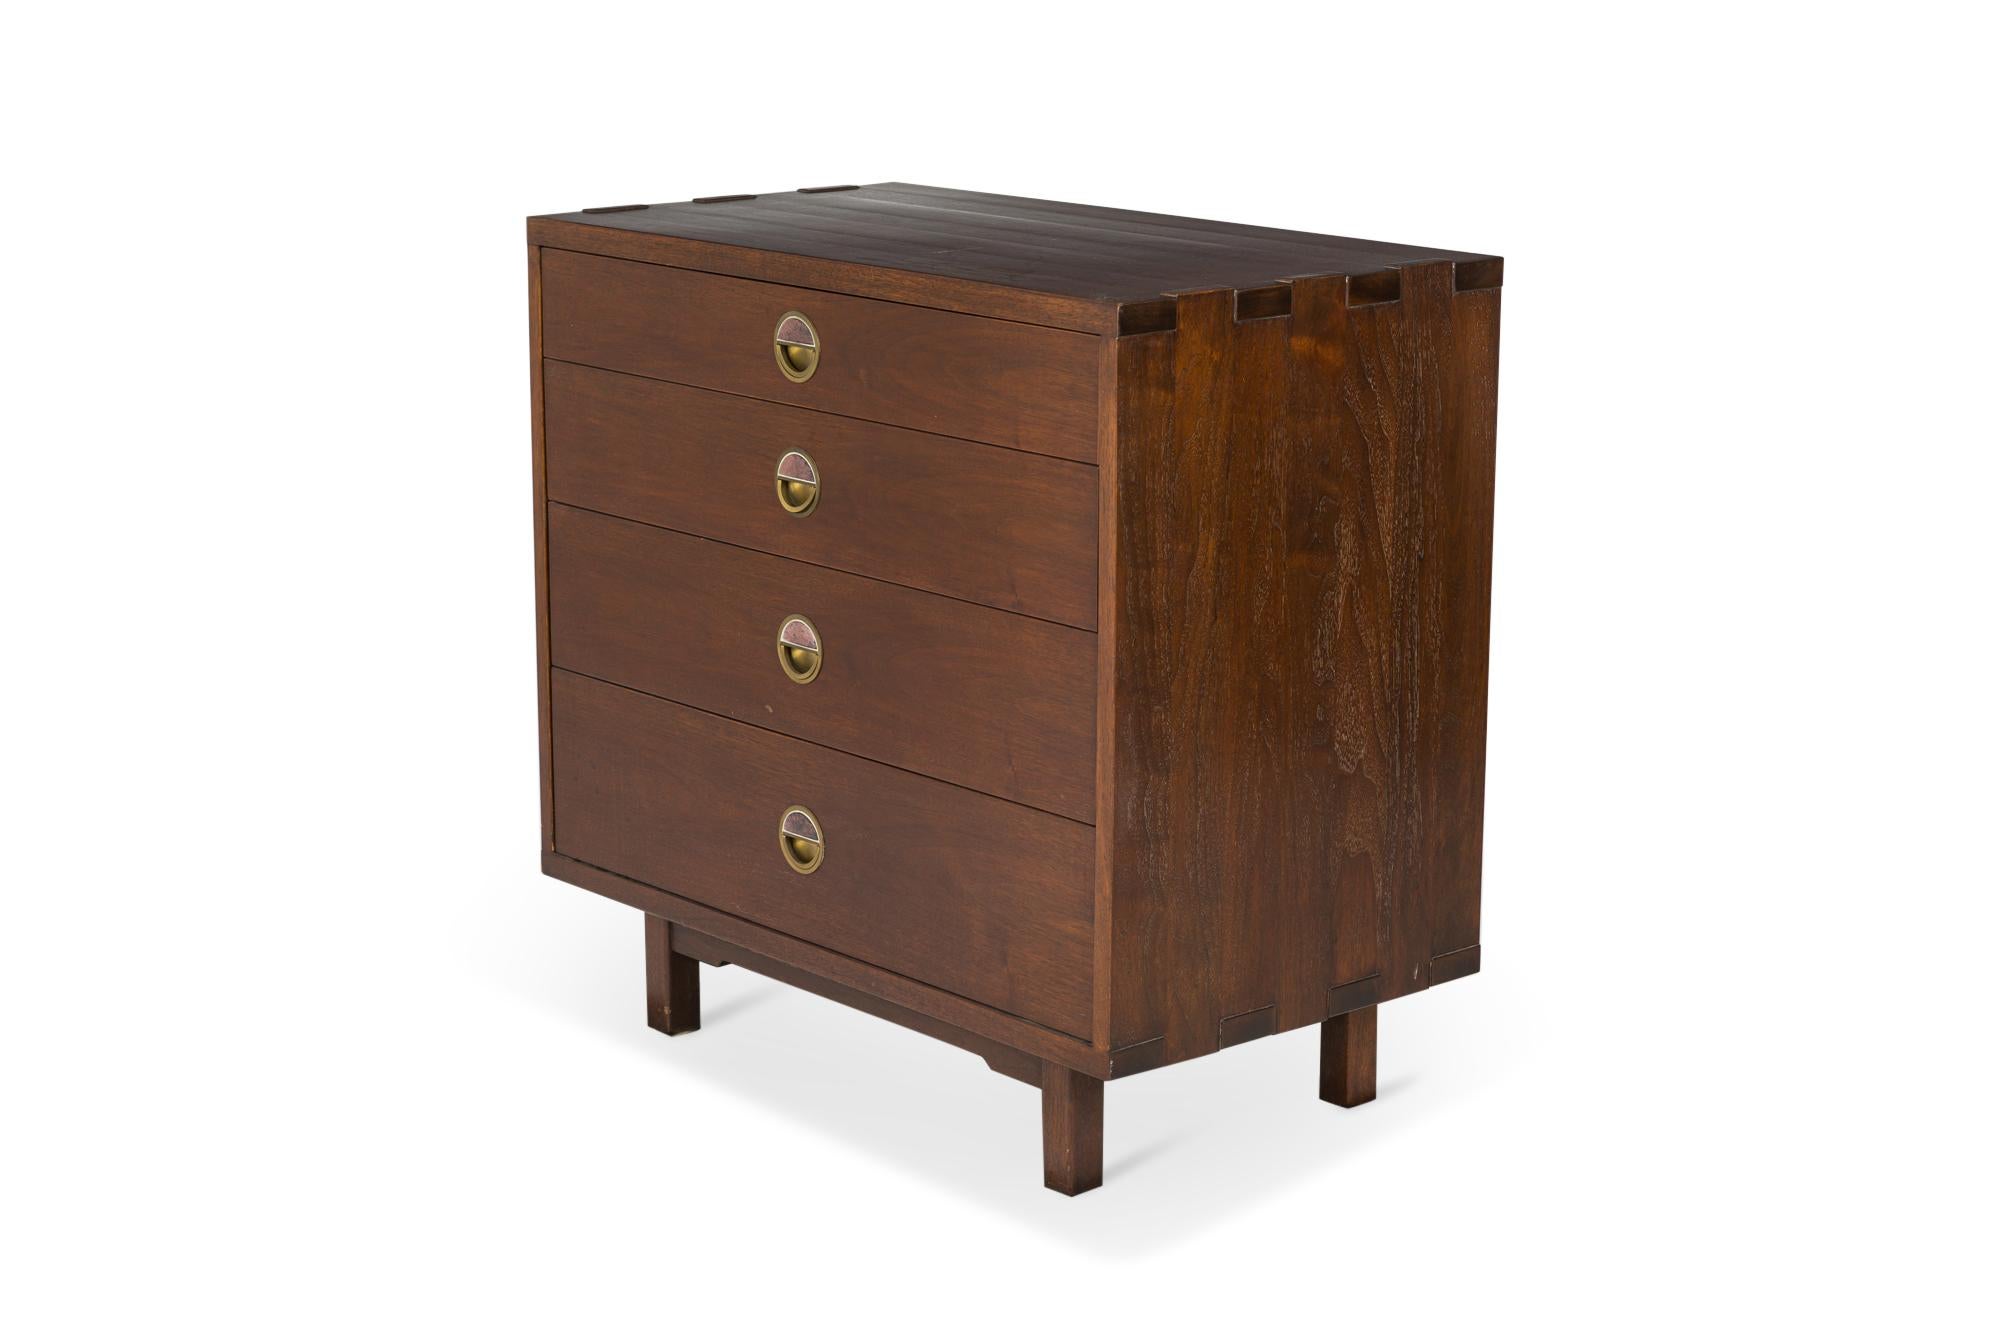 American Mid-Century walnut four-drawer bachelor's chest with drawer pulls made of brass and Natzler ceramic half-moon burgundy tiles, resting on four square walnut legs. (